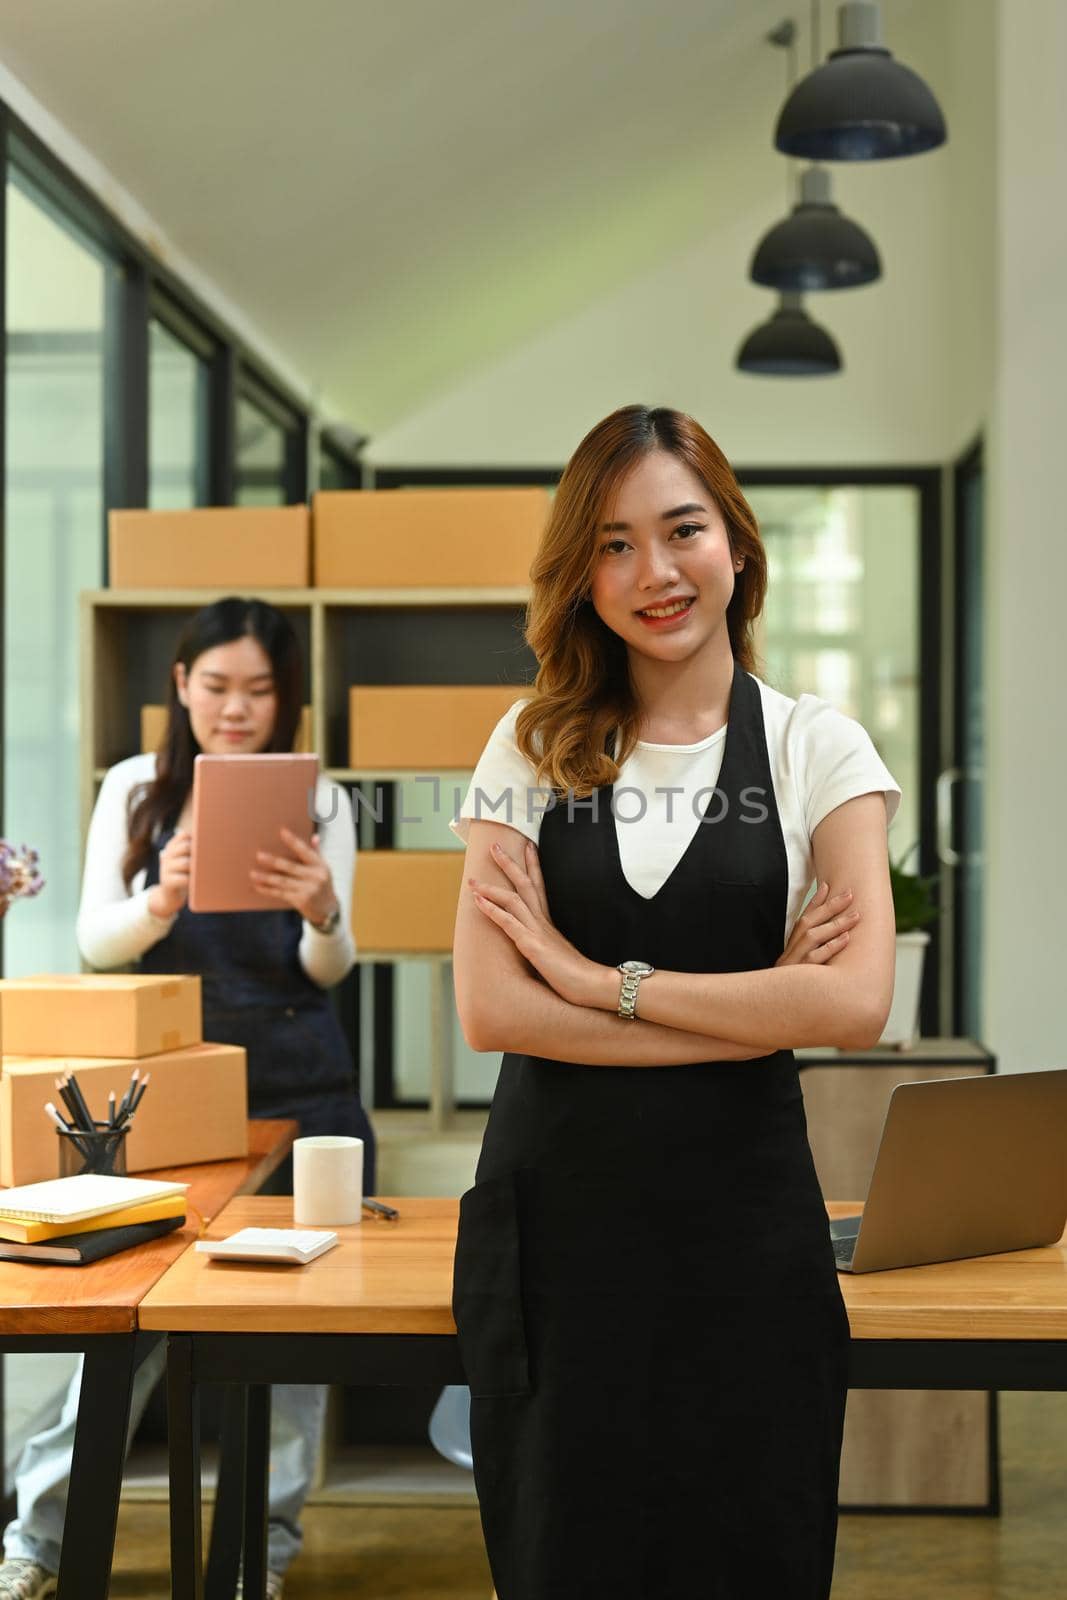 Portrait of small business owner in apron standing with arms crossed in modern home office.